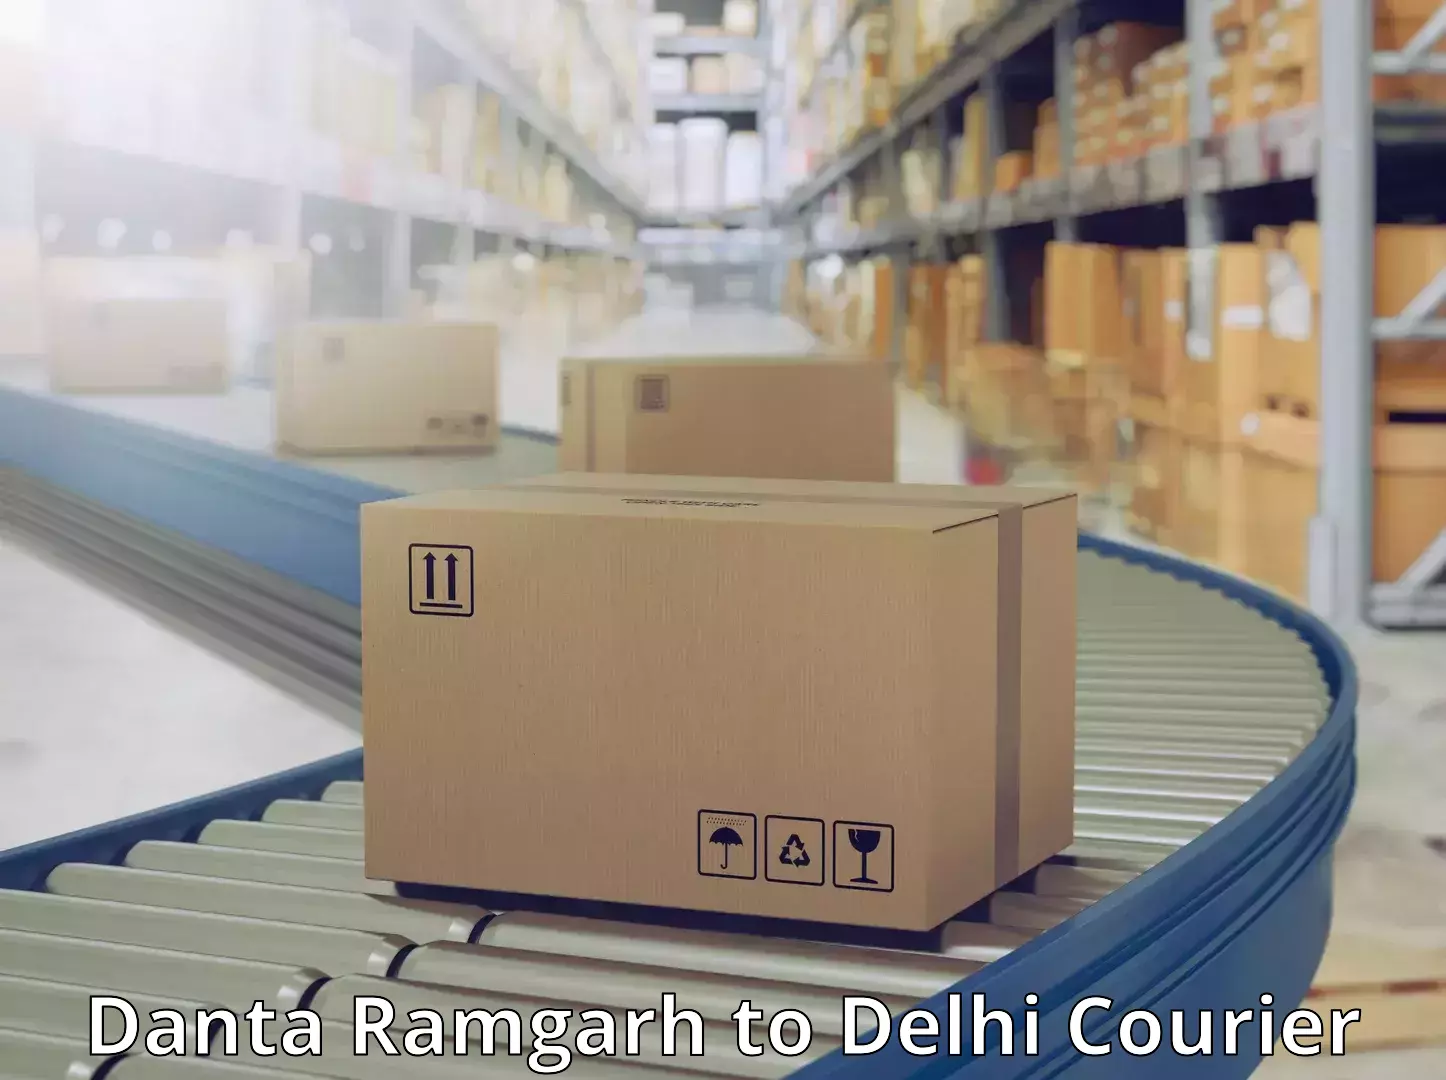 Rapid shipping services Danta Ramgarh to NCR